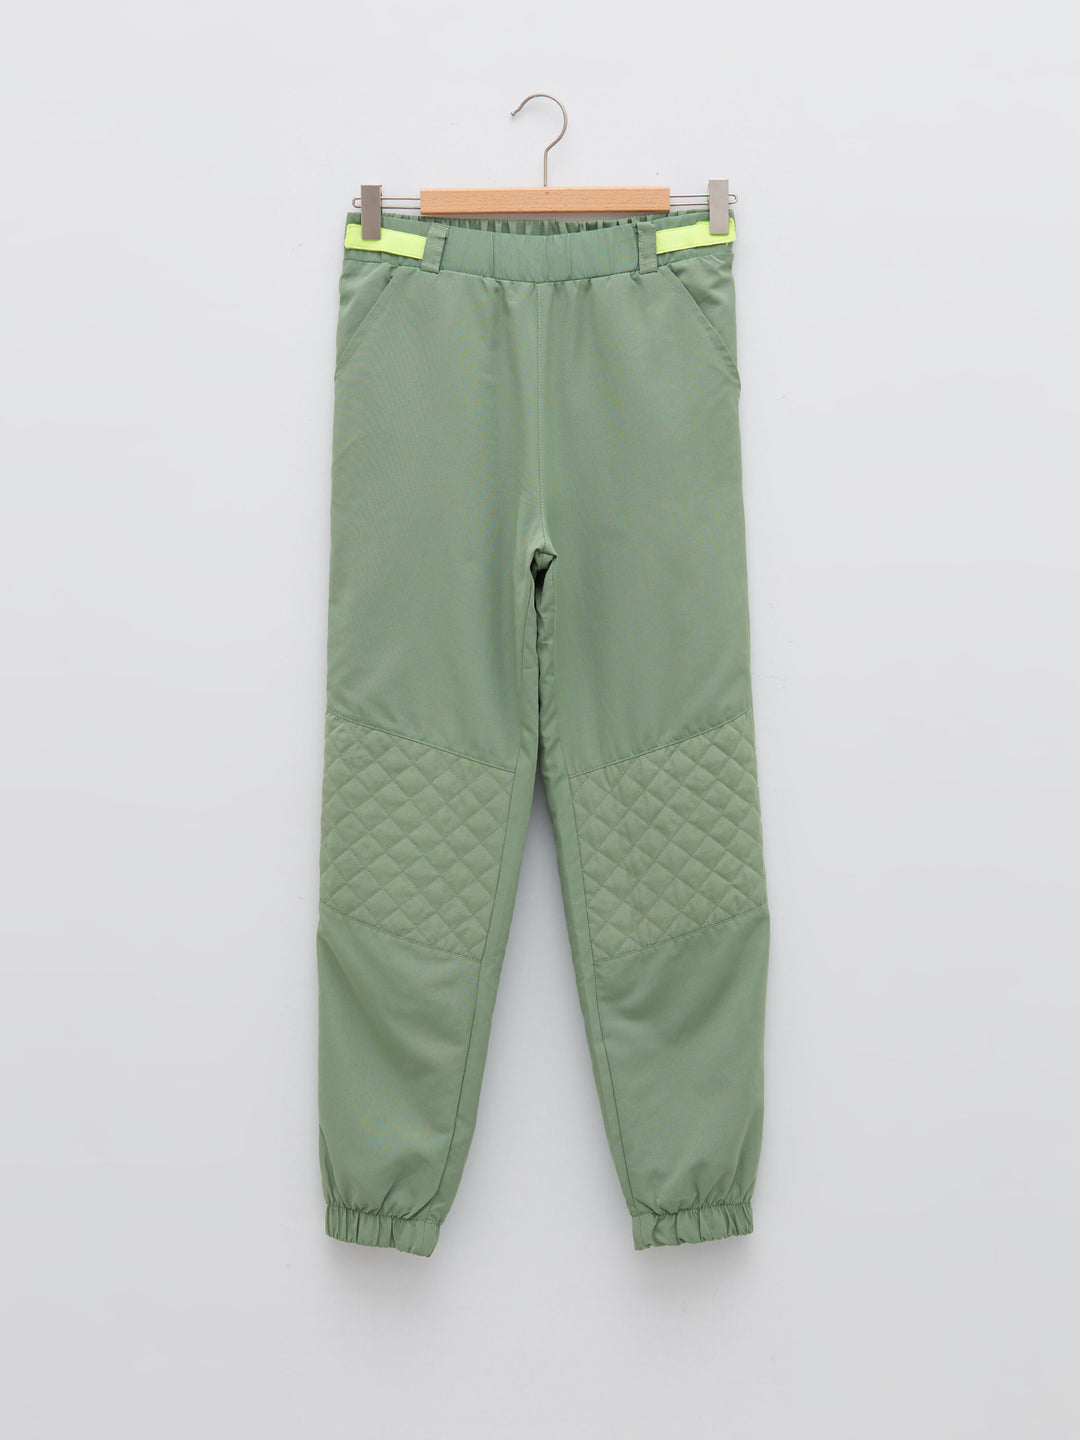 Green Colored Trousers For Kids Girls